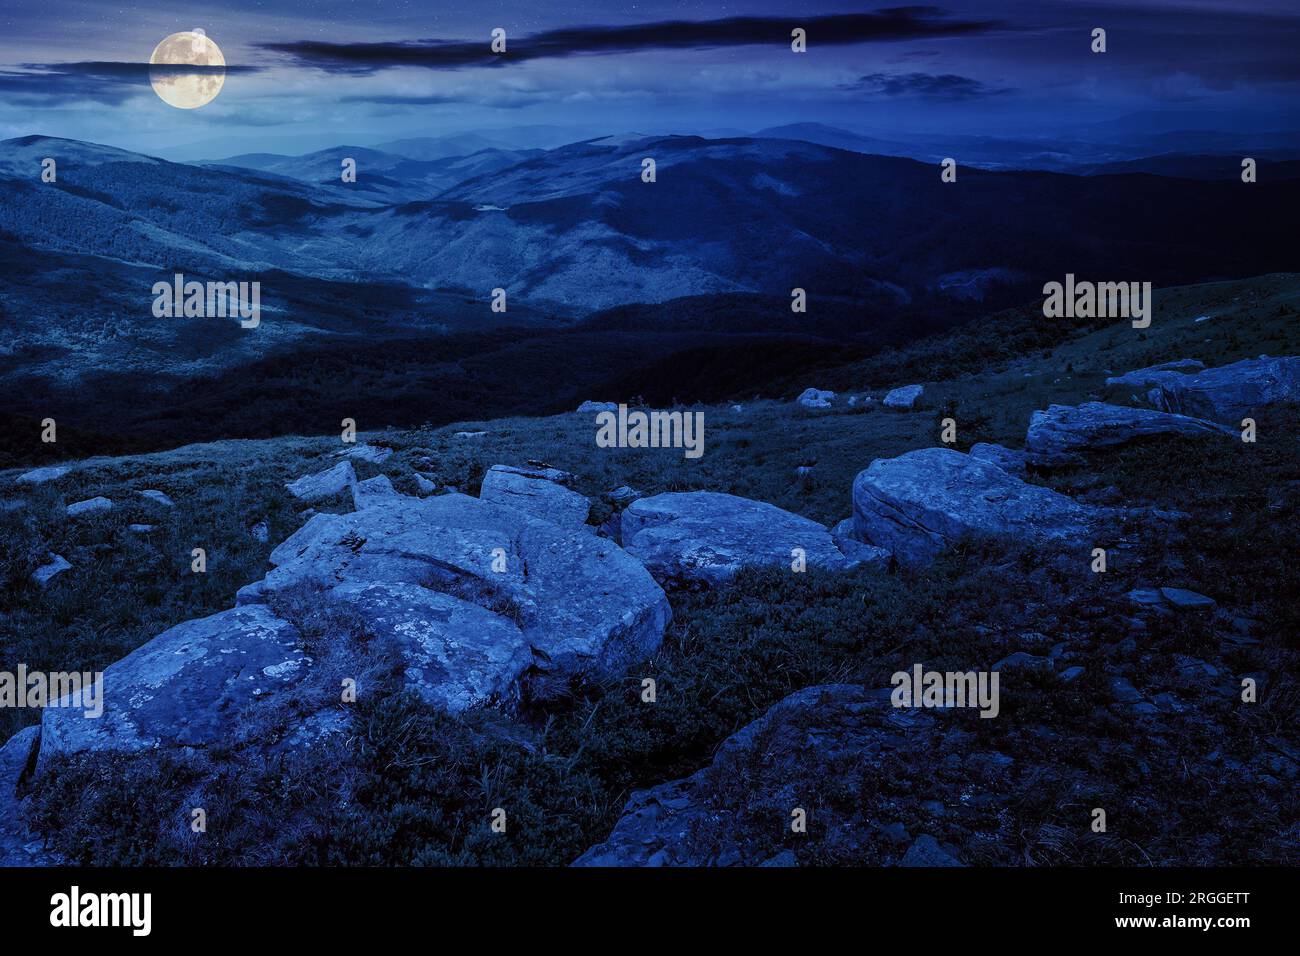 mountain landscape with white boulders on the hillside at night. wonderful countryside scenery in full moon light Stock Photo